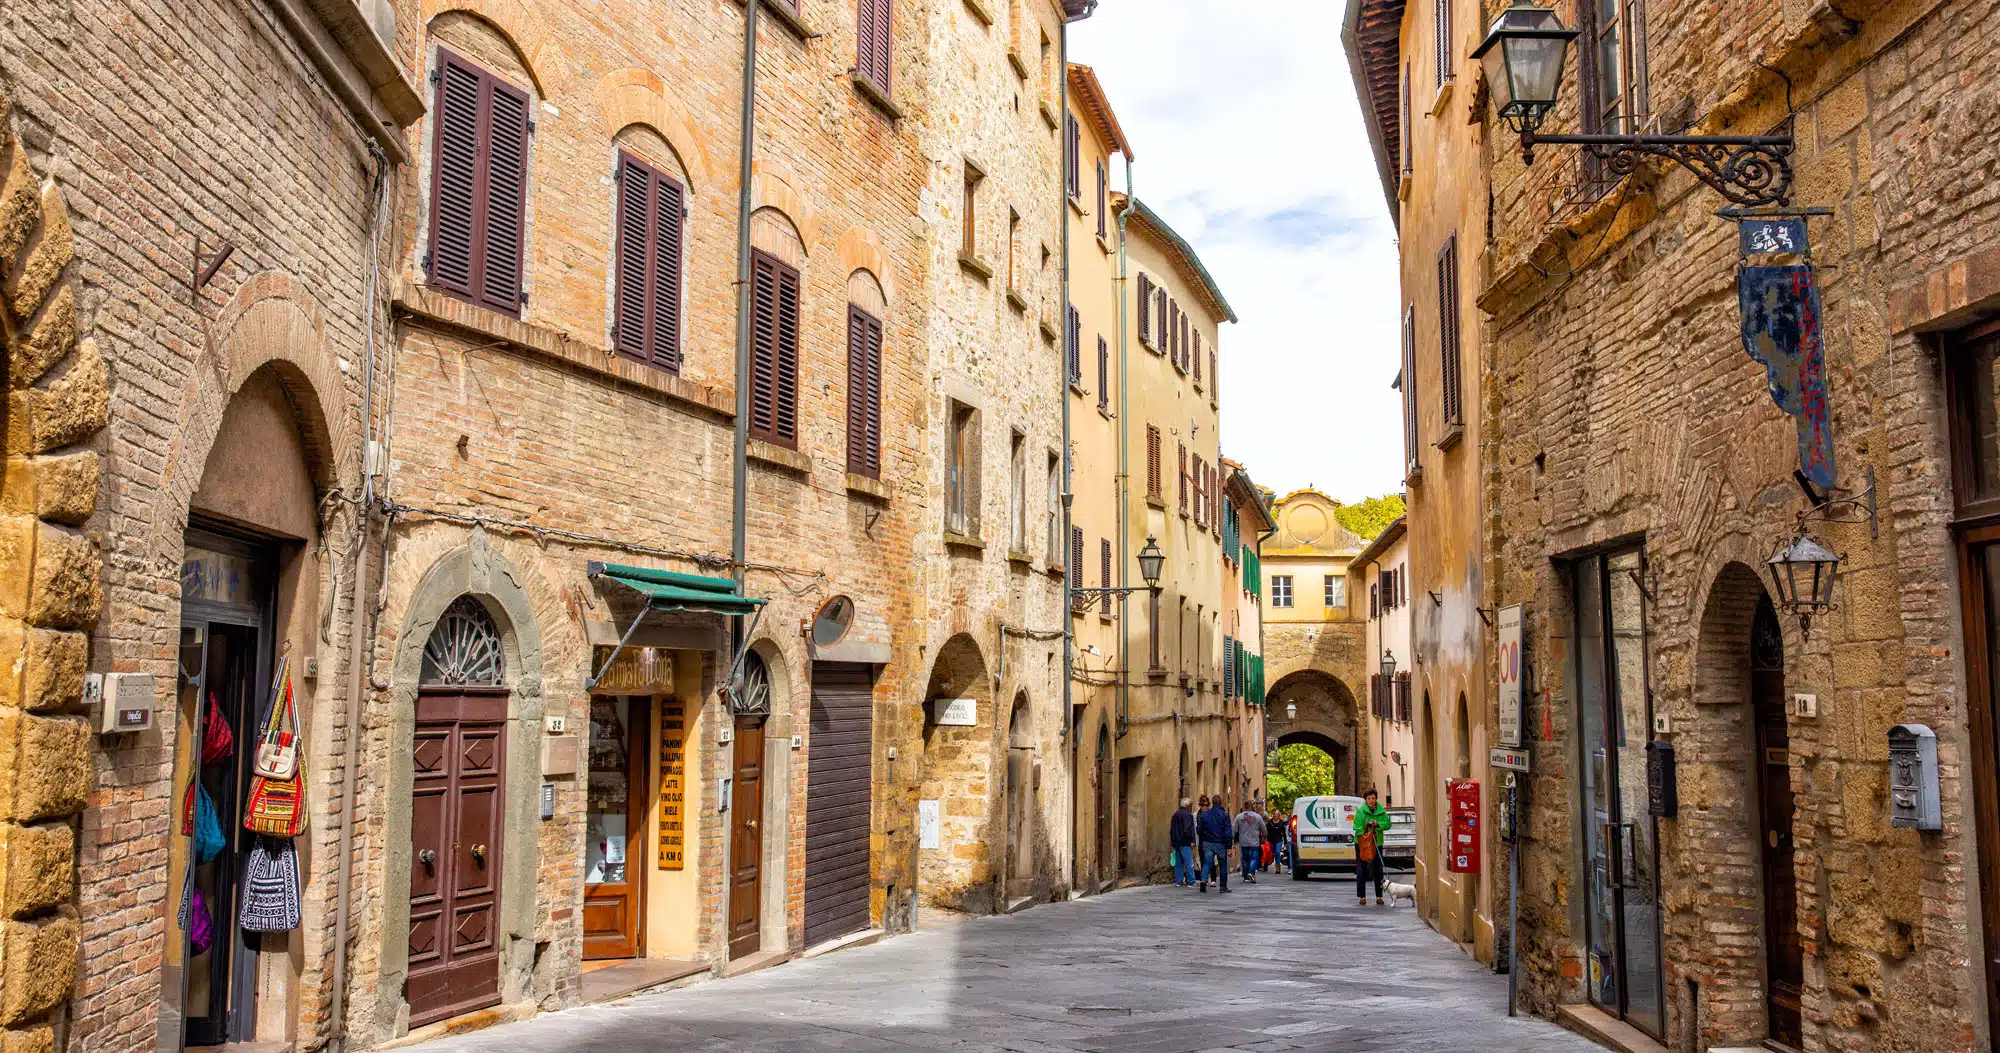 Featured image for “Volterra, Italy: Best Things to Do, Map & HELPFUL Tips”